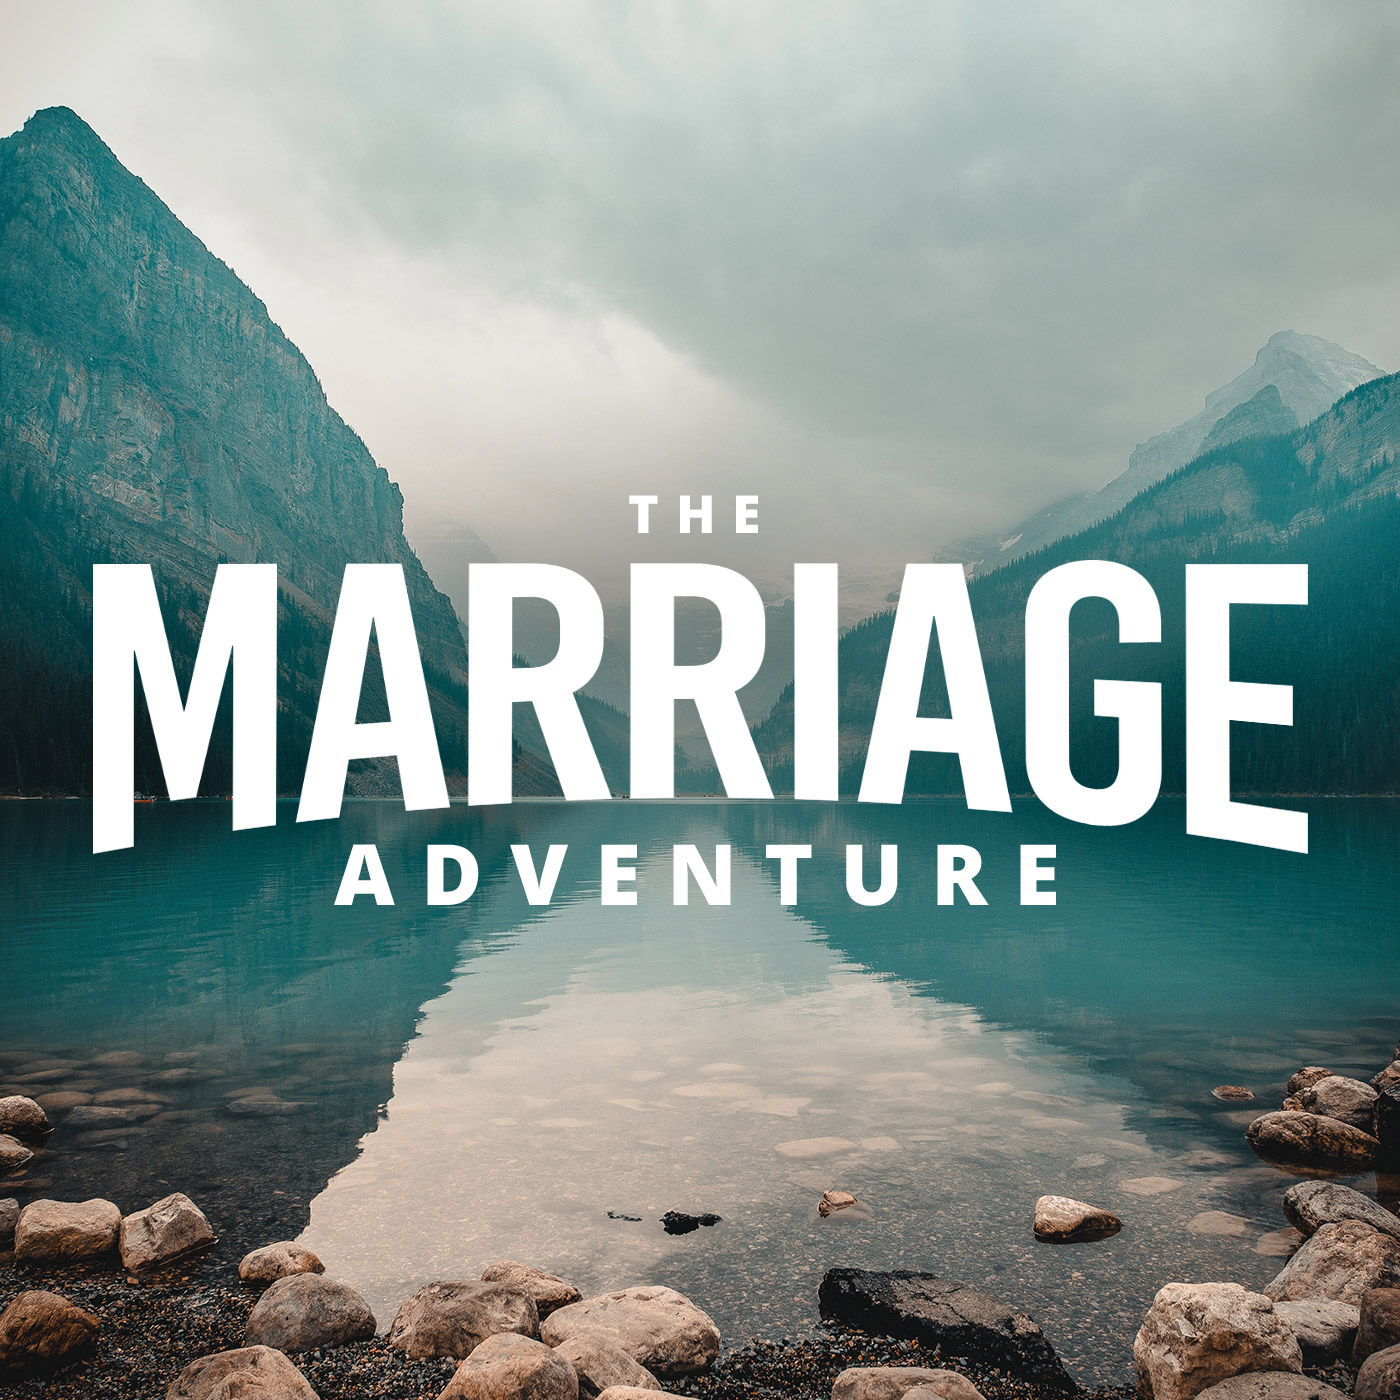 The Marriage Adventure - Join the Adventure!